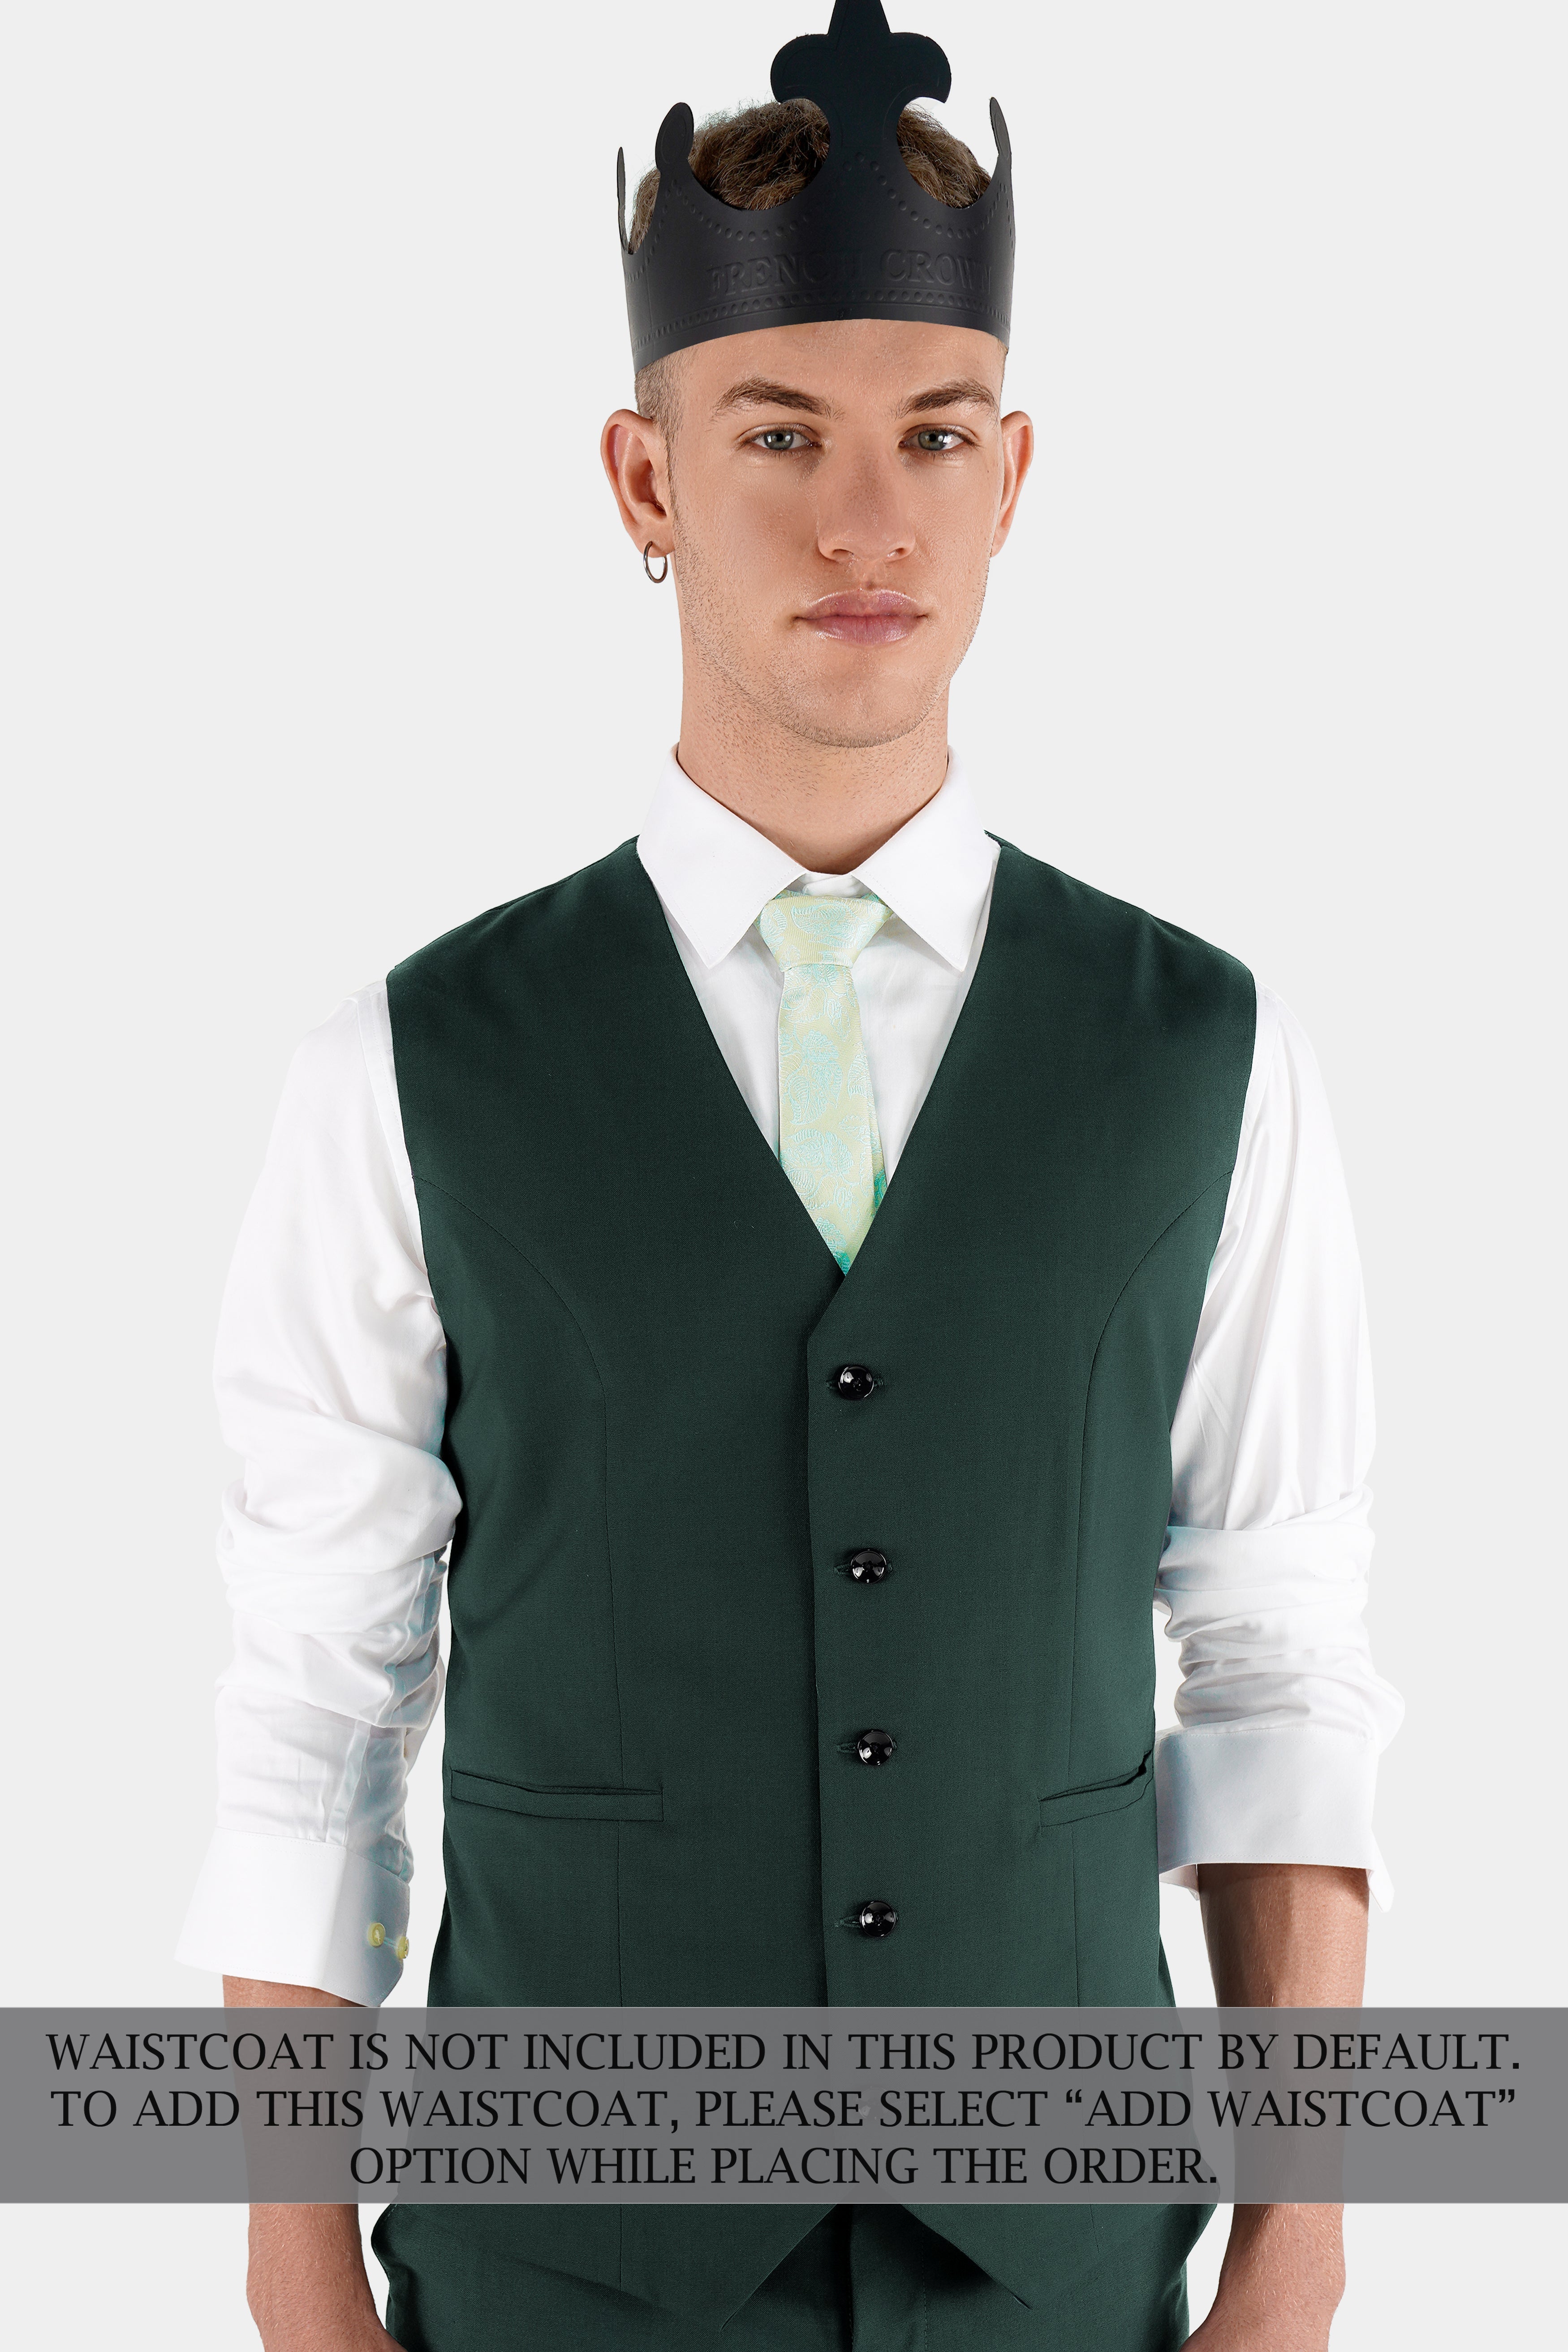 Gable Green Single Breasted Wool Rich Suit ST2728-SB-36, ST2728-SB-38, ST2728-SB-40, ST2728-SB-42, ST2728-SB-44, ST2728-SB-46, ST2728-SB-48, ST2728-SB-50, ST2728-SB-52, ST2728-SB-54, ST2728-SB-56, ST2728-SB-58, ST2728-SB-60